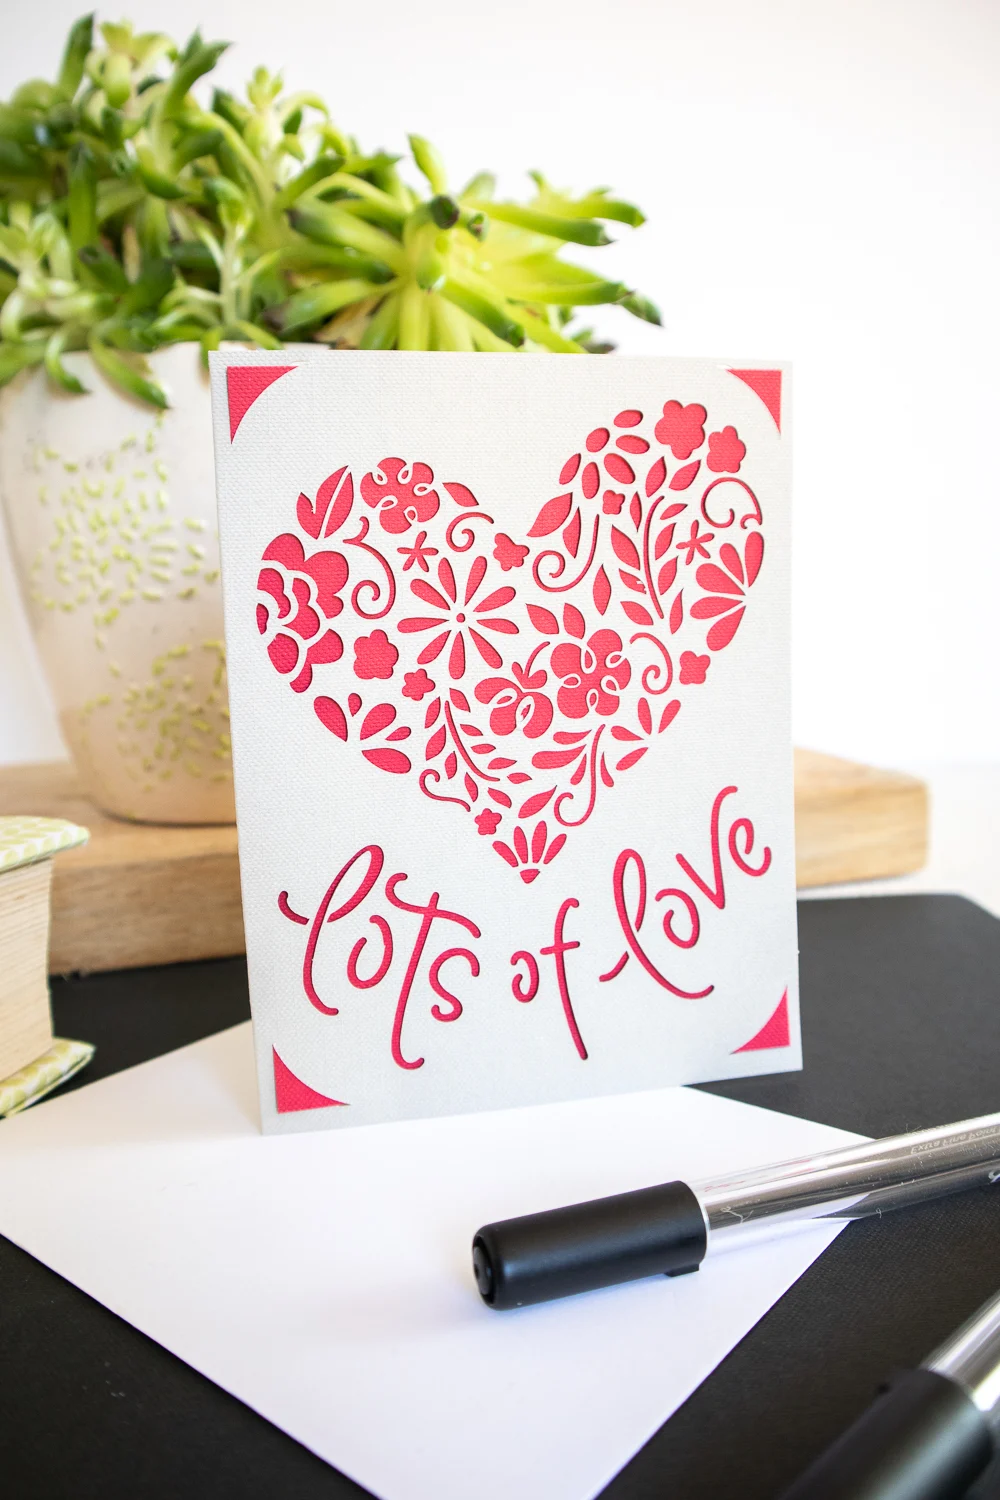 Lots of love detailed heart card on desk with pen.